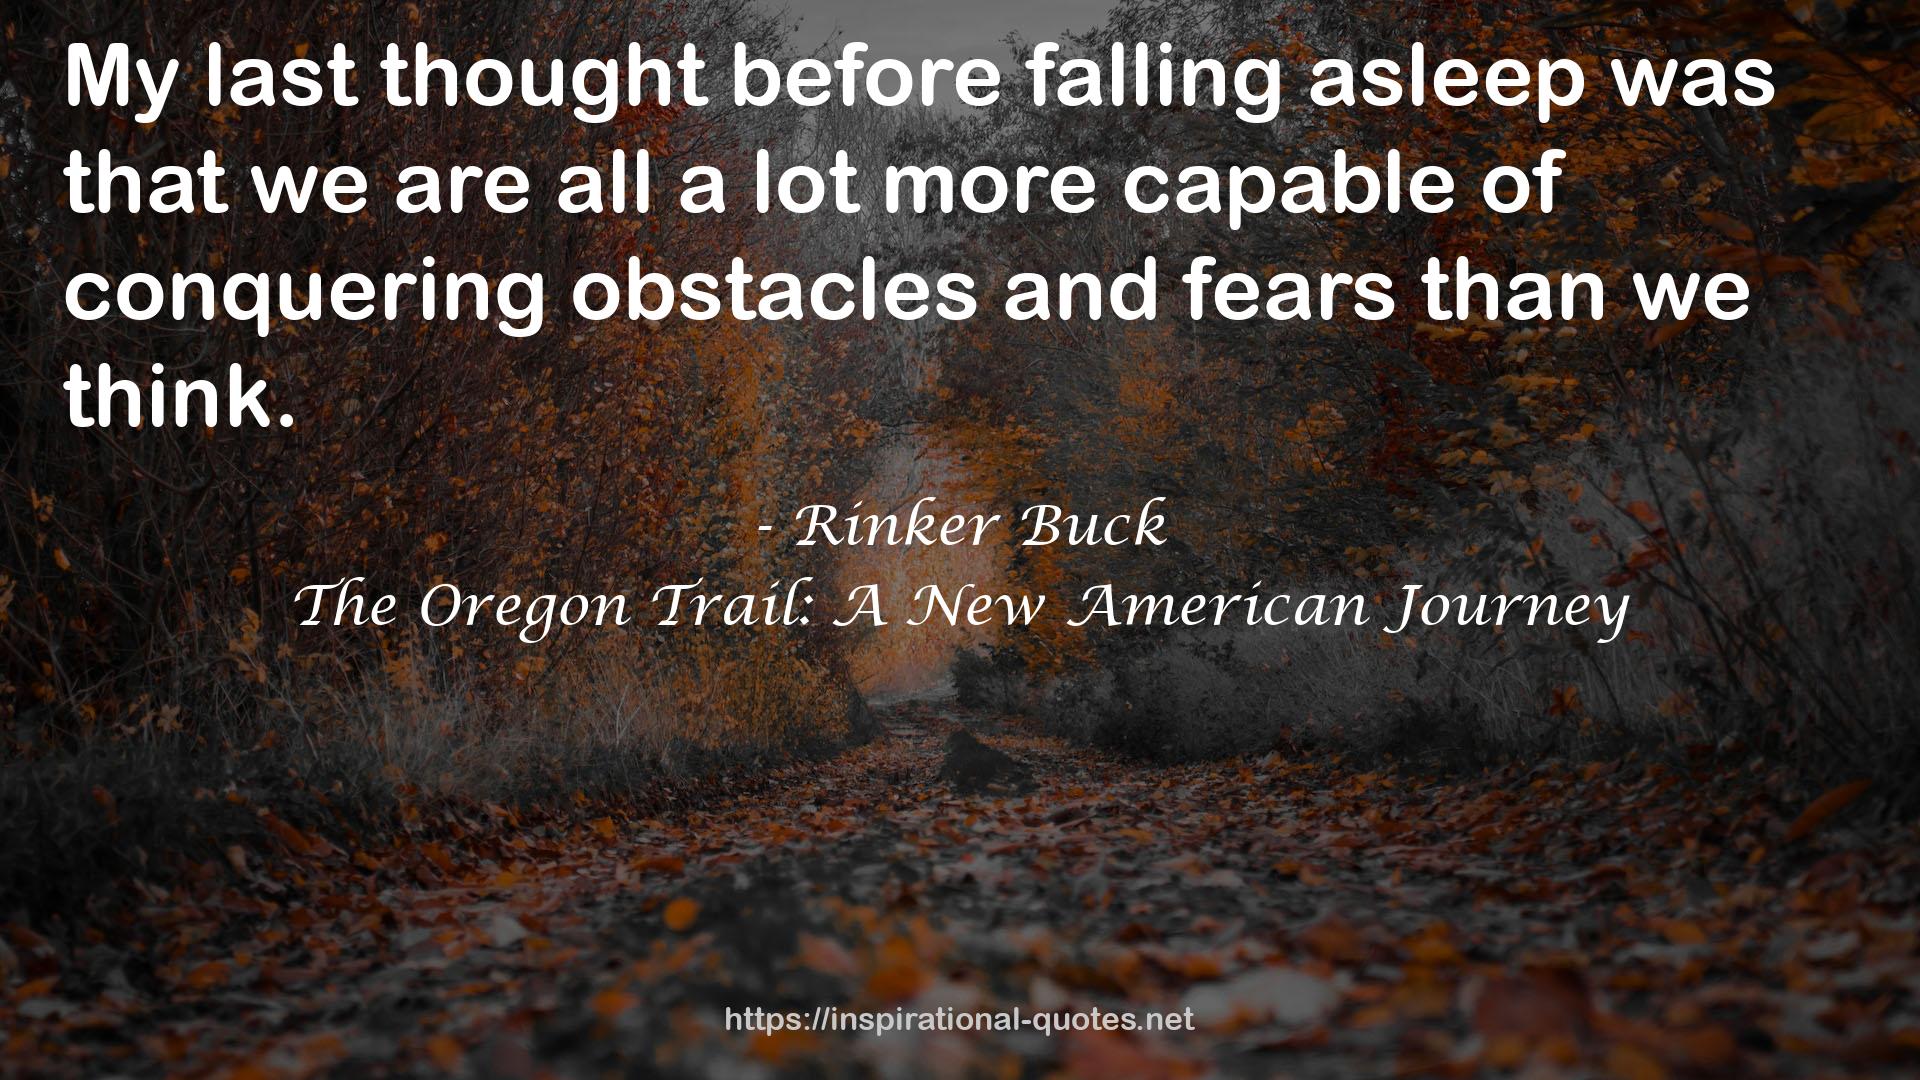 Rinker Buck QUOTES